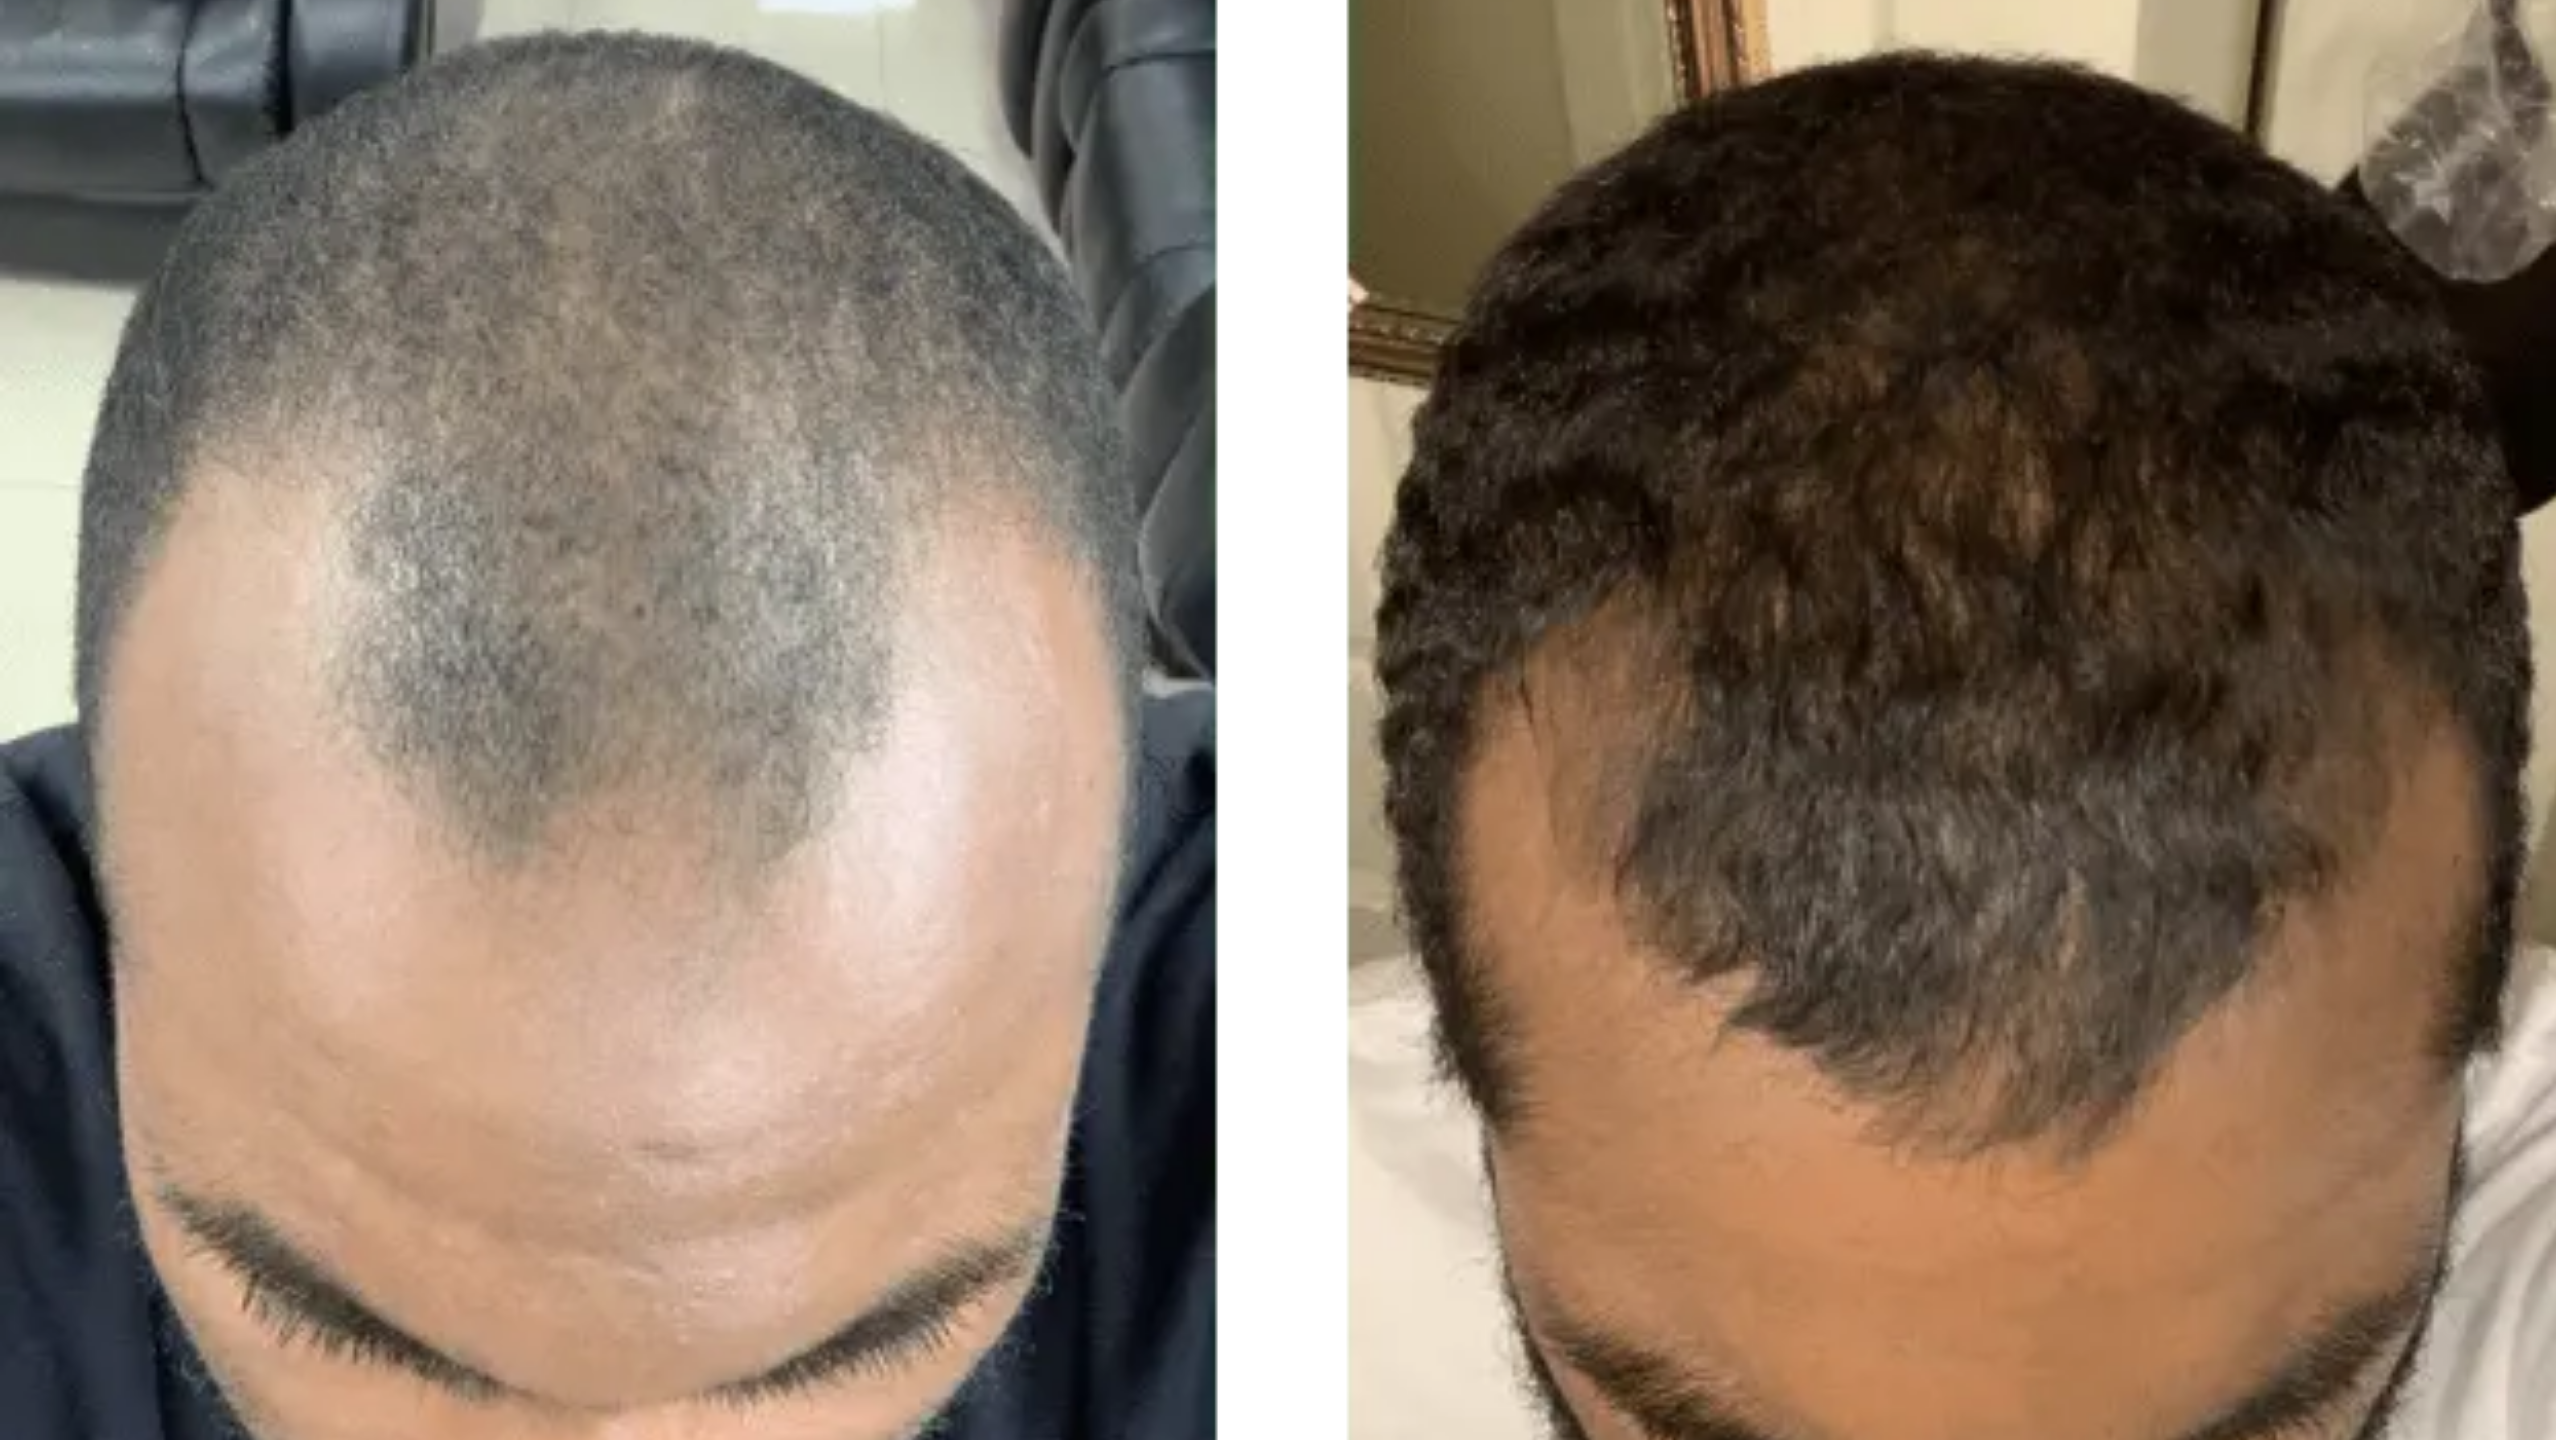 Aggregate more than 132 finasteride before hair transplant best